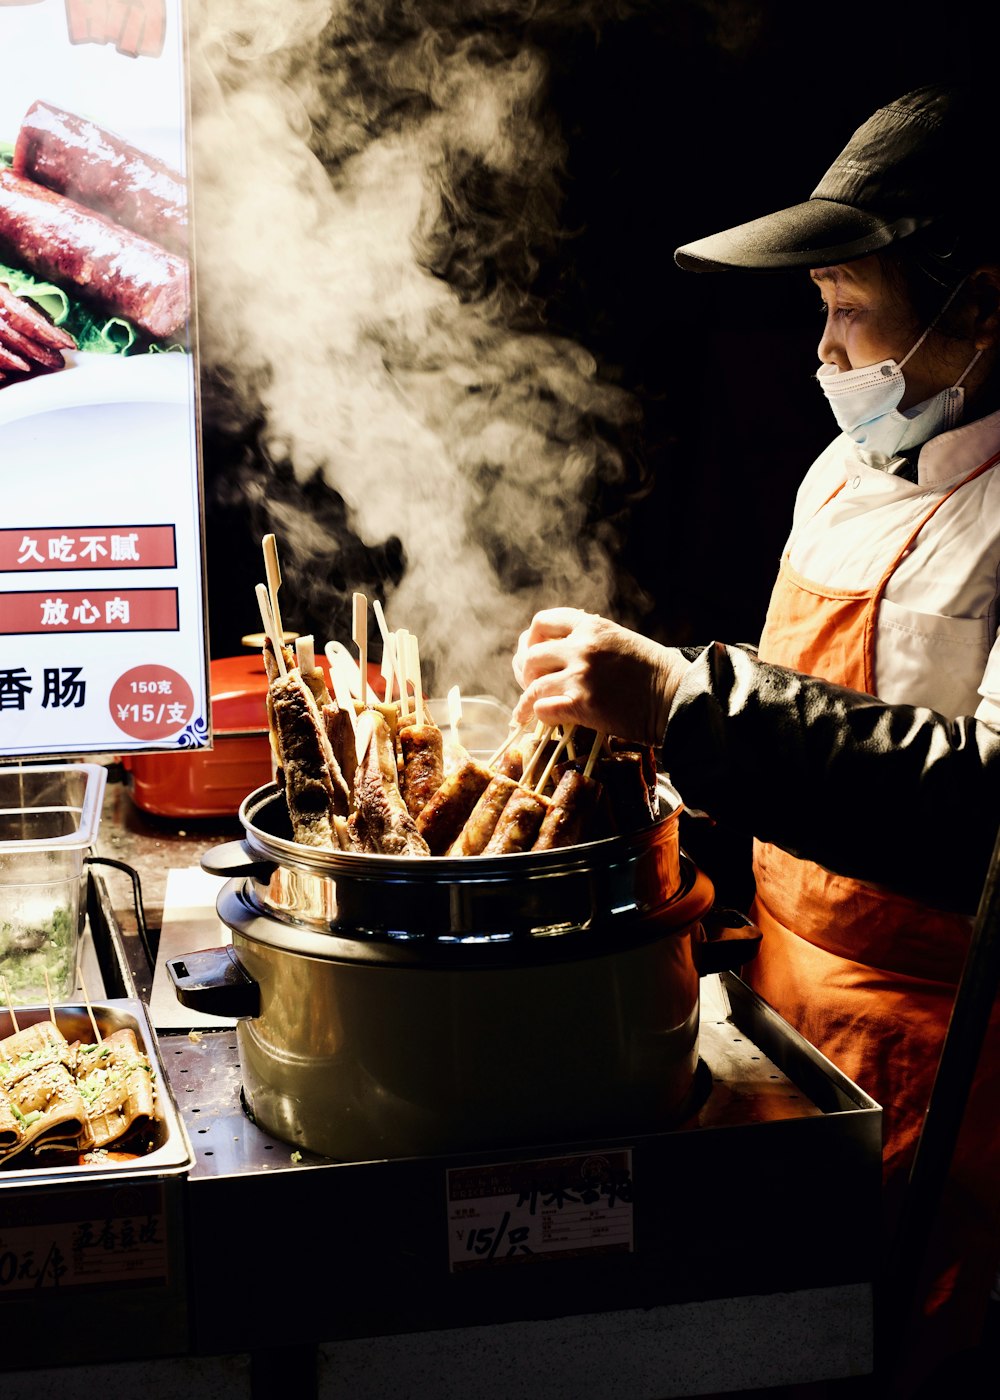 A man cooking food in a large pot photo – Free Food Image on Unsplash